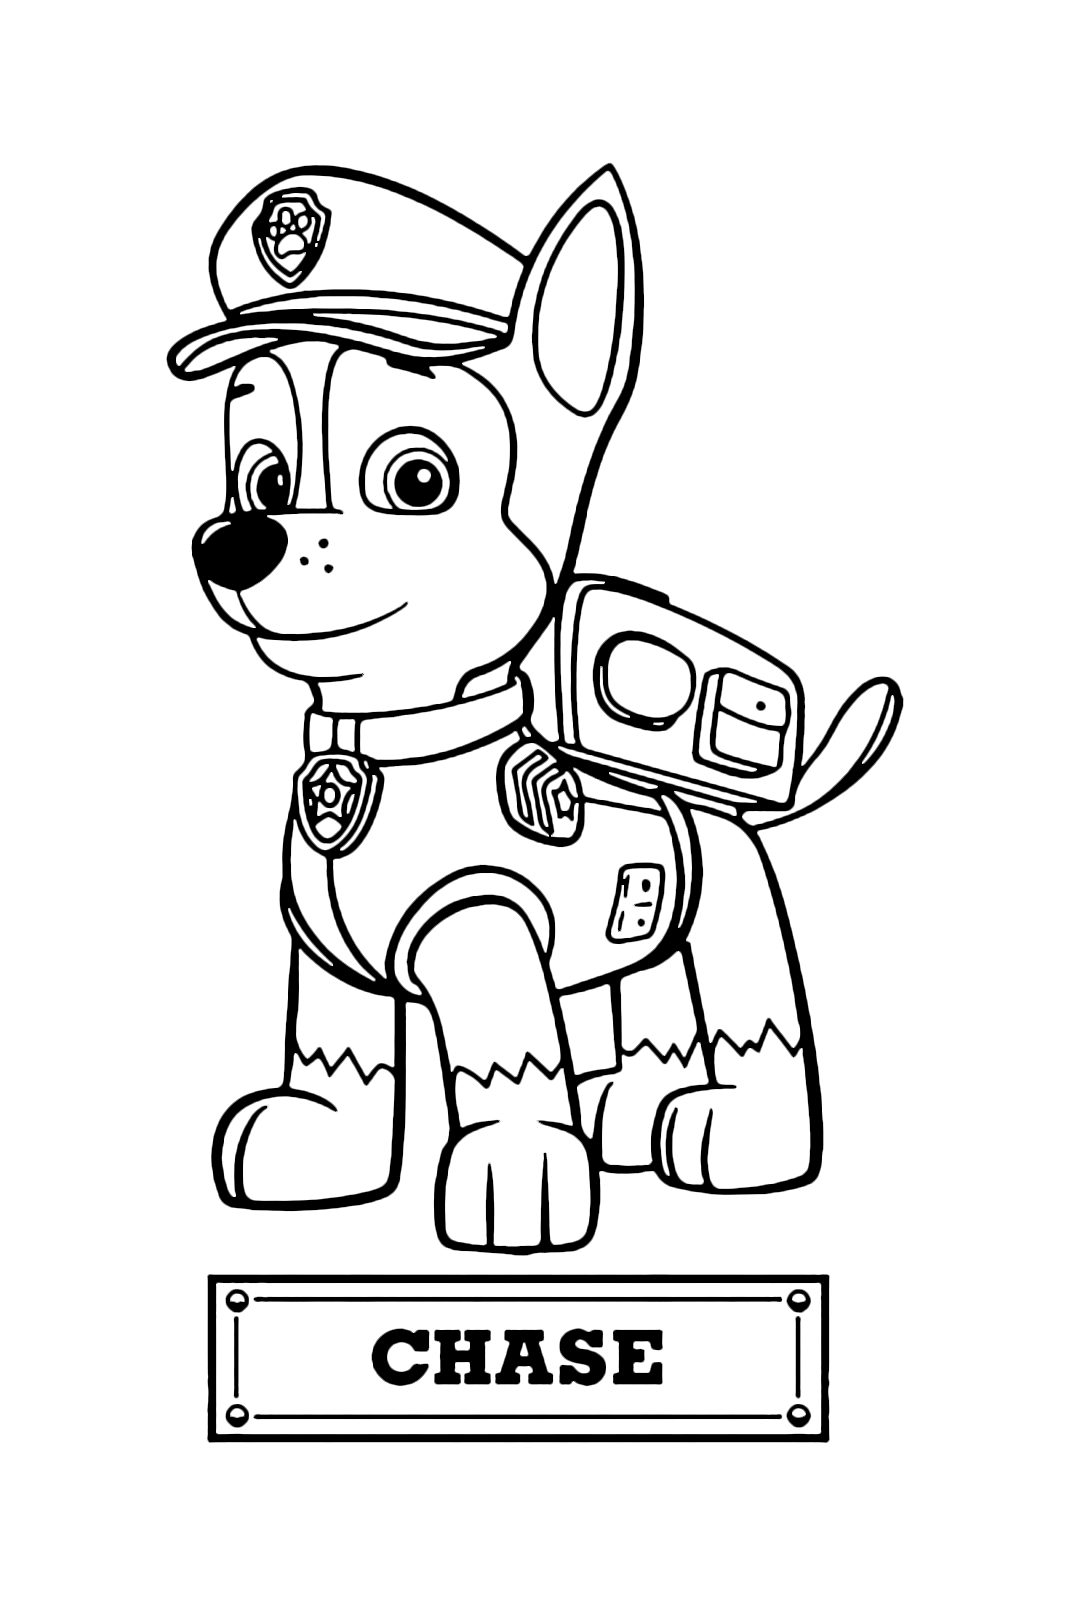 Chase The Police Dog Coloring Pages